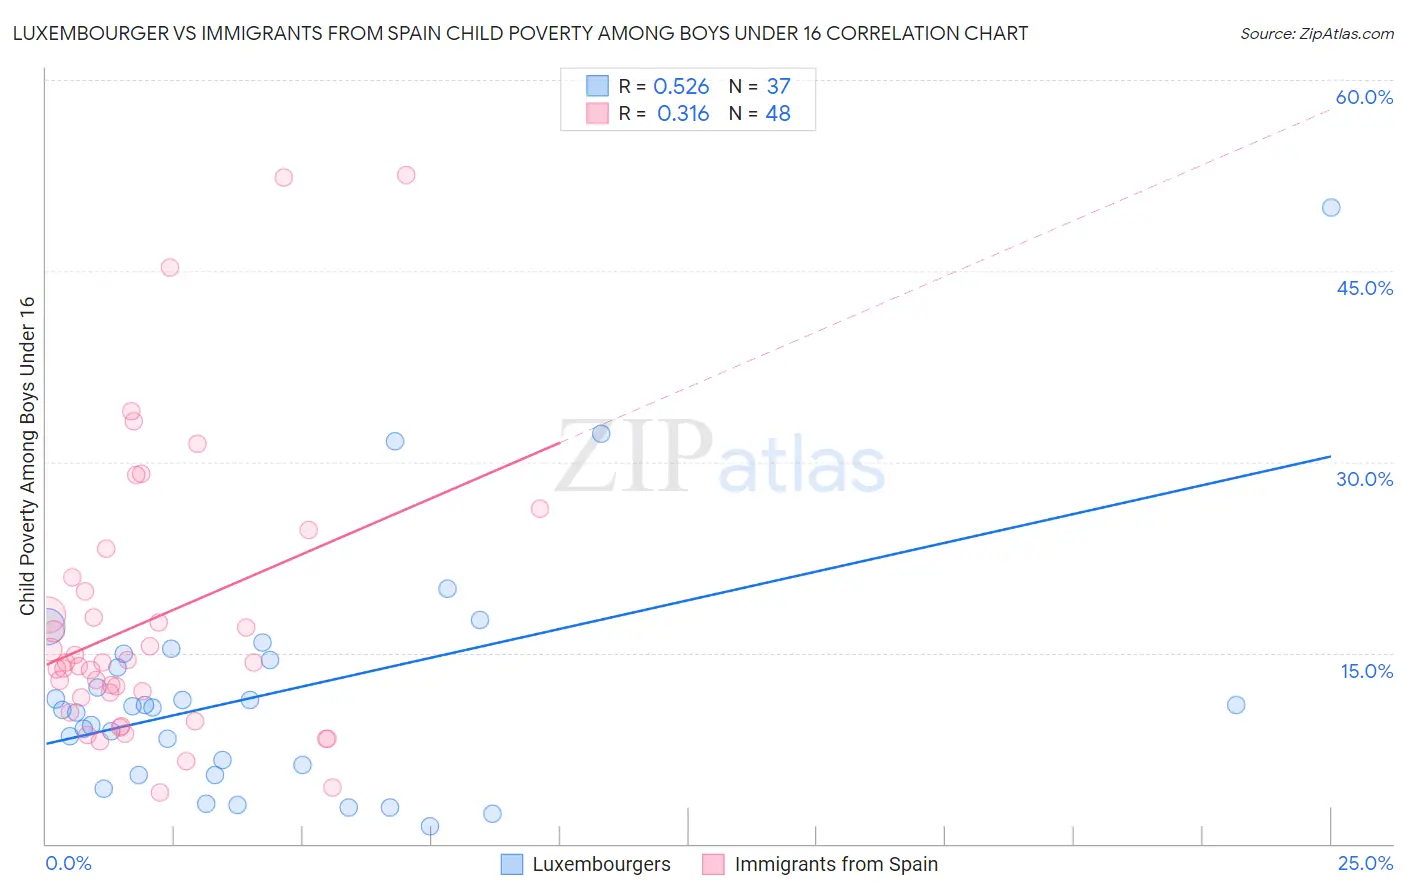 Luxembourger vs Immigrants from Spain Child Poverty Among Boys Under 16